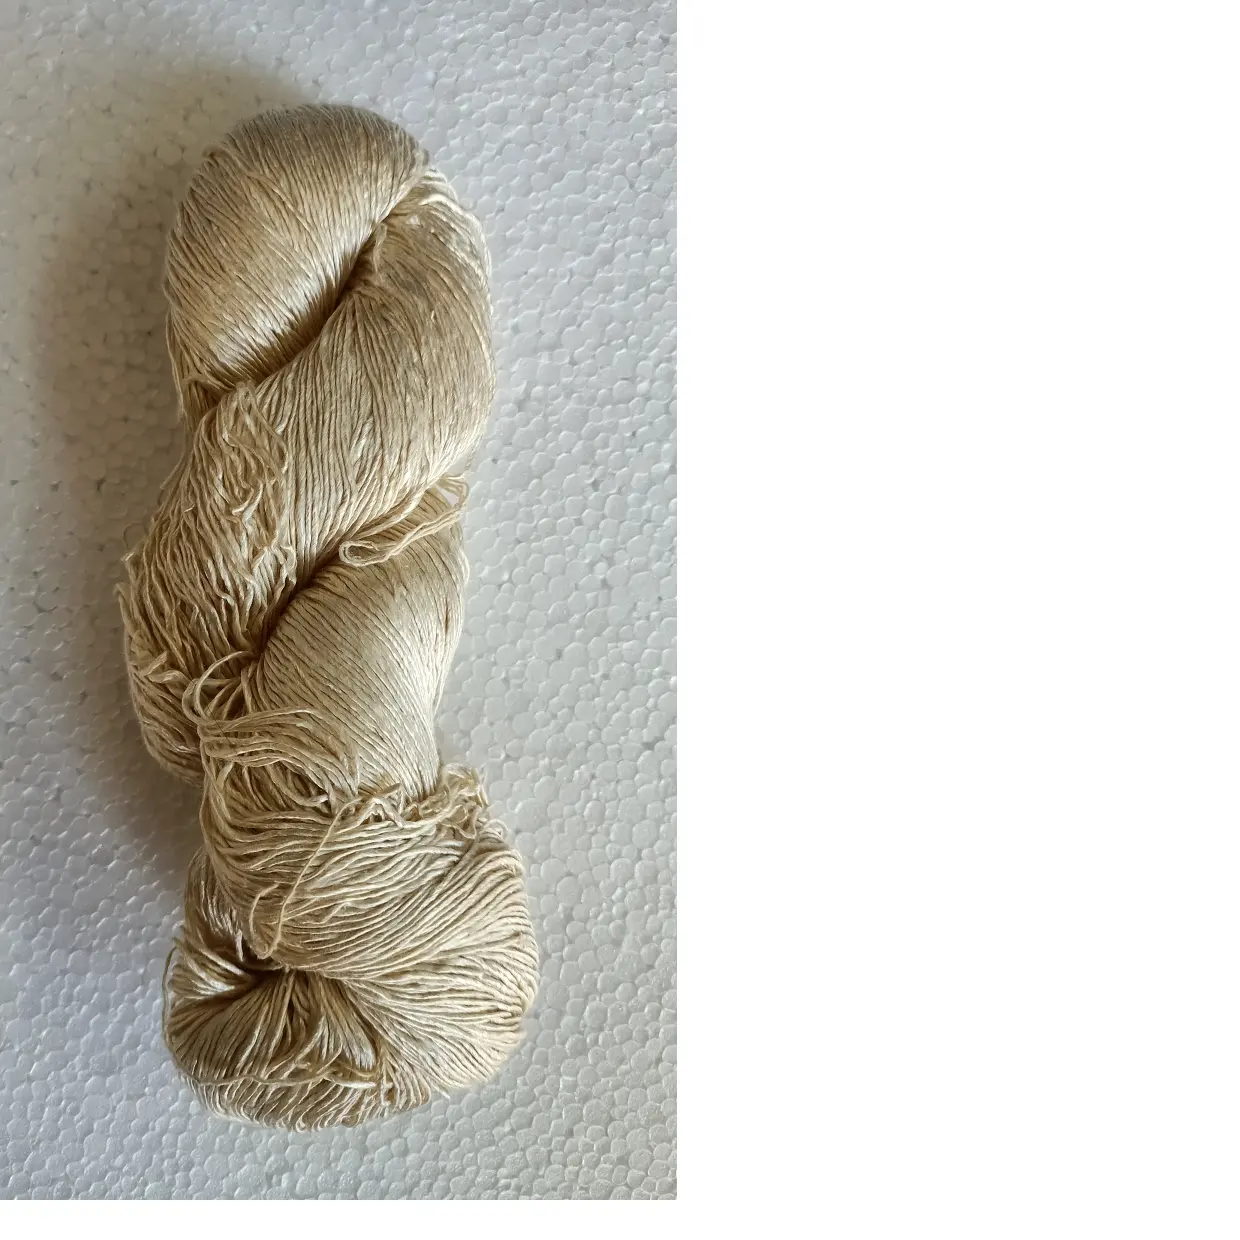 100% pure mulberry silk yarn in premium quality ideal for textile spinners and weavers for resale in ` 1 mm thickness